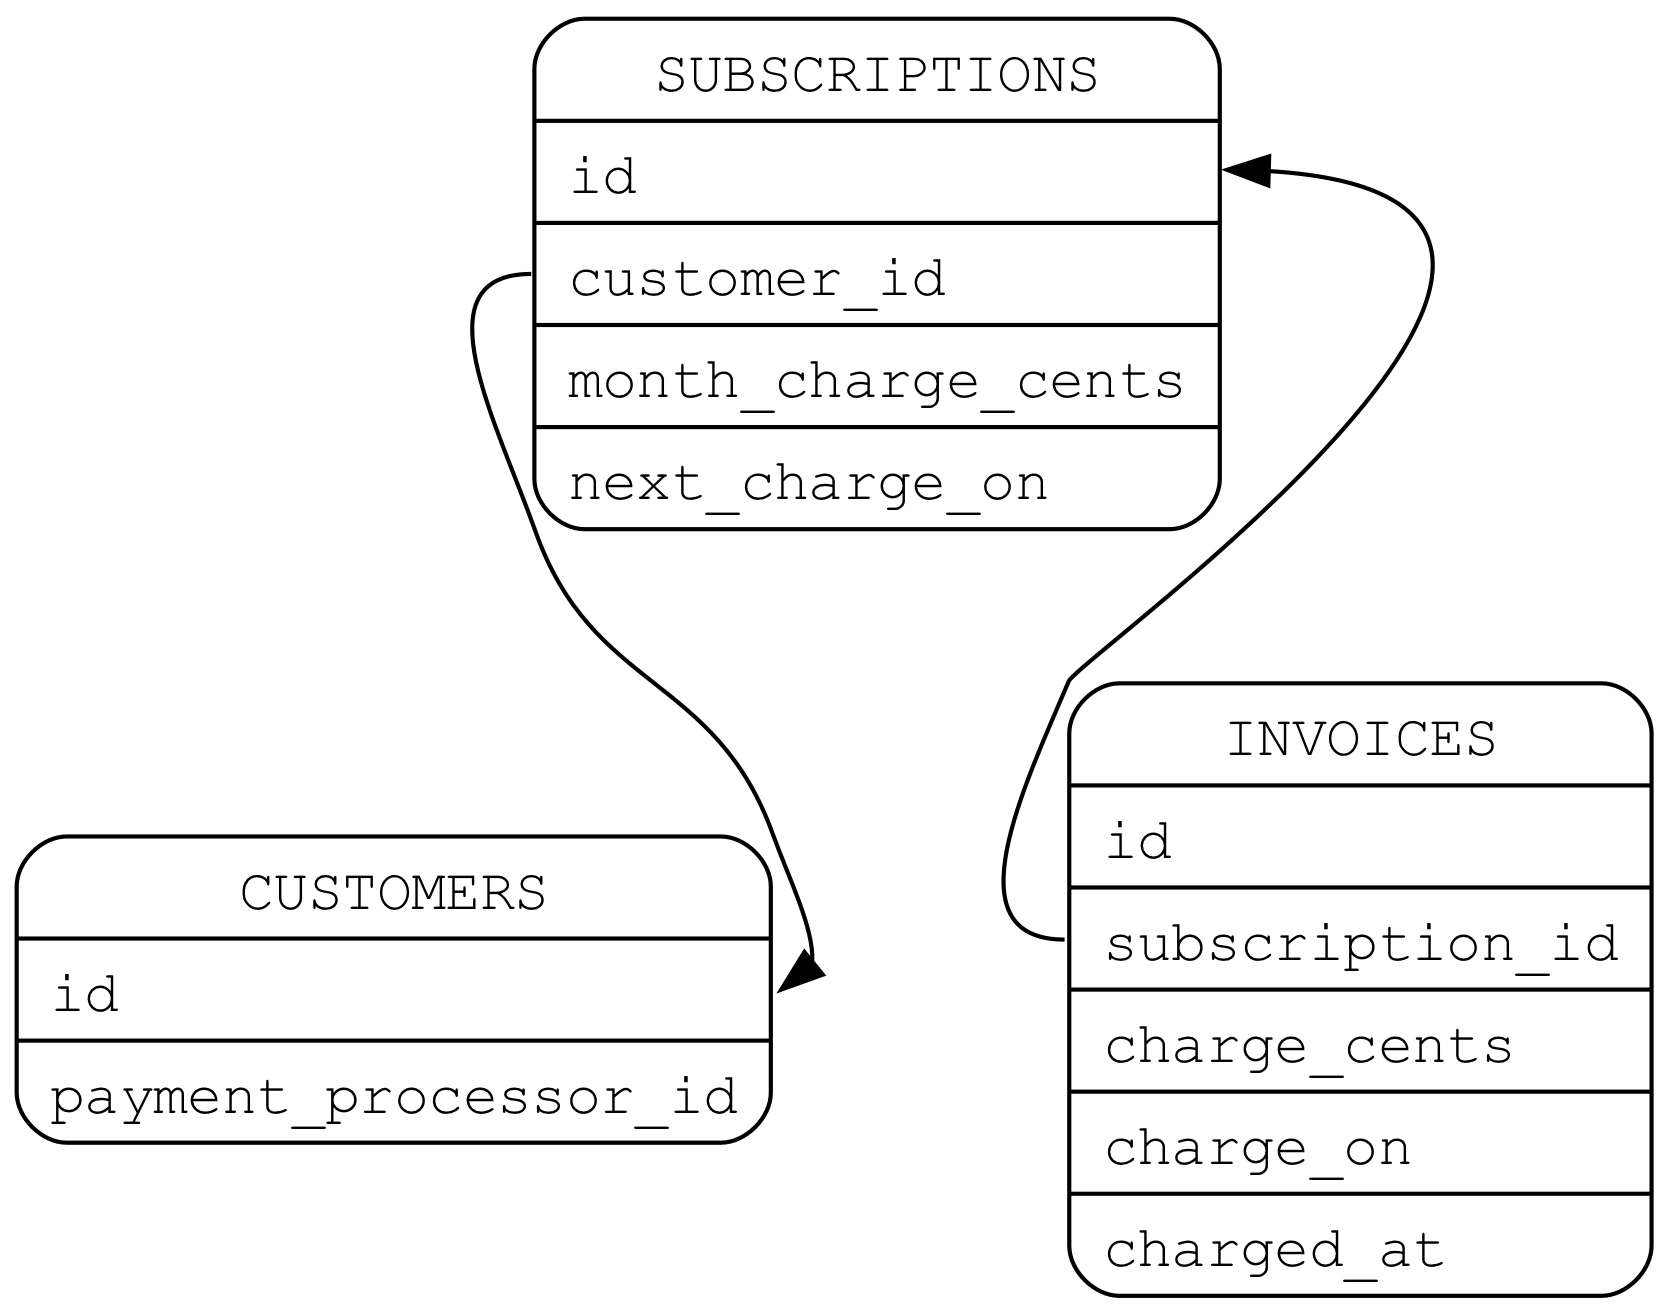 ERD diagram showing an invoices model that references a subscription model that references a customer model.  The invoice has 'id', 'subscription id', 'charge cents', 'charge on', and 'charged at' fields. The subscription has 'id', 'customer id', 'month charge cents' and 'next charge' on fields. THe customer has an id a payment processor id field. There is an arrow from the subscription's customer id field to the customer's id field.